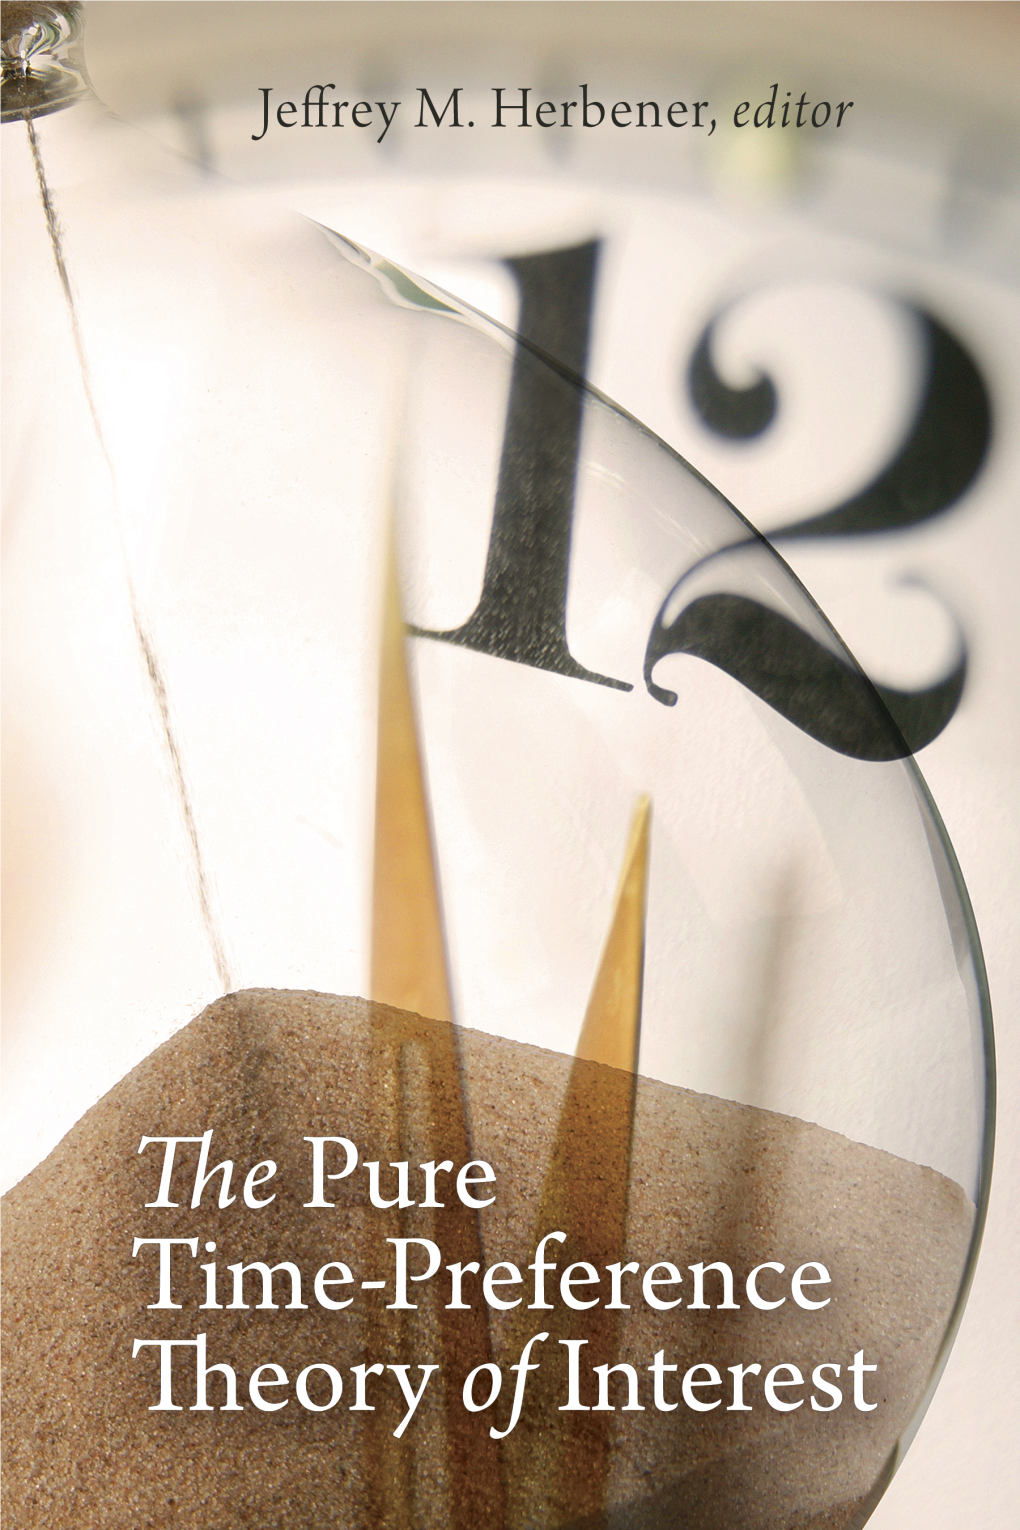 The Pure Time-Preference Theory of Interest